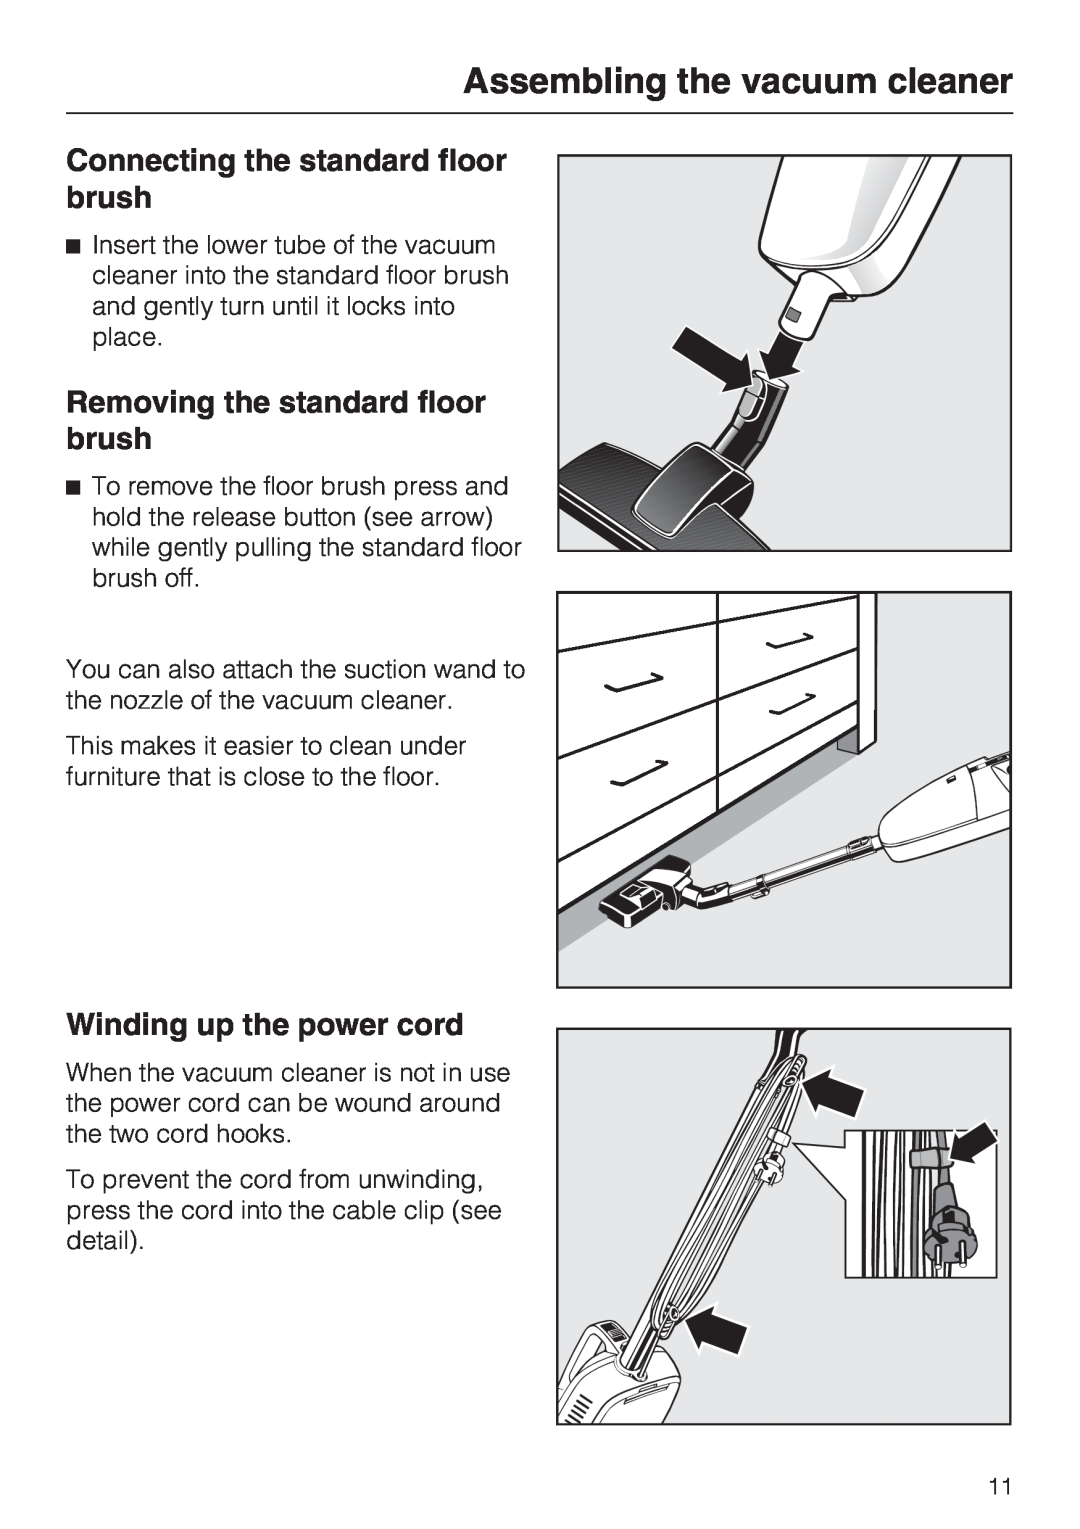 Miele S 190 manual Connecting the standard floor brush, Removing the standard floor brush, Winding up the power cord 